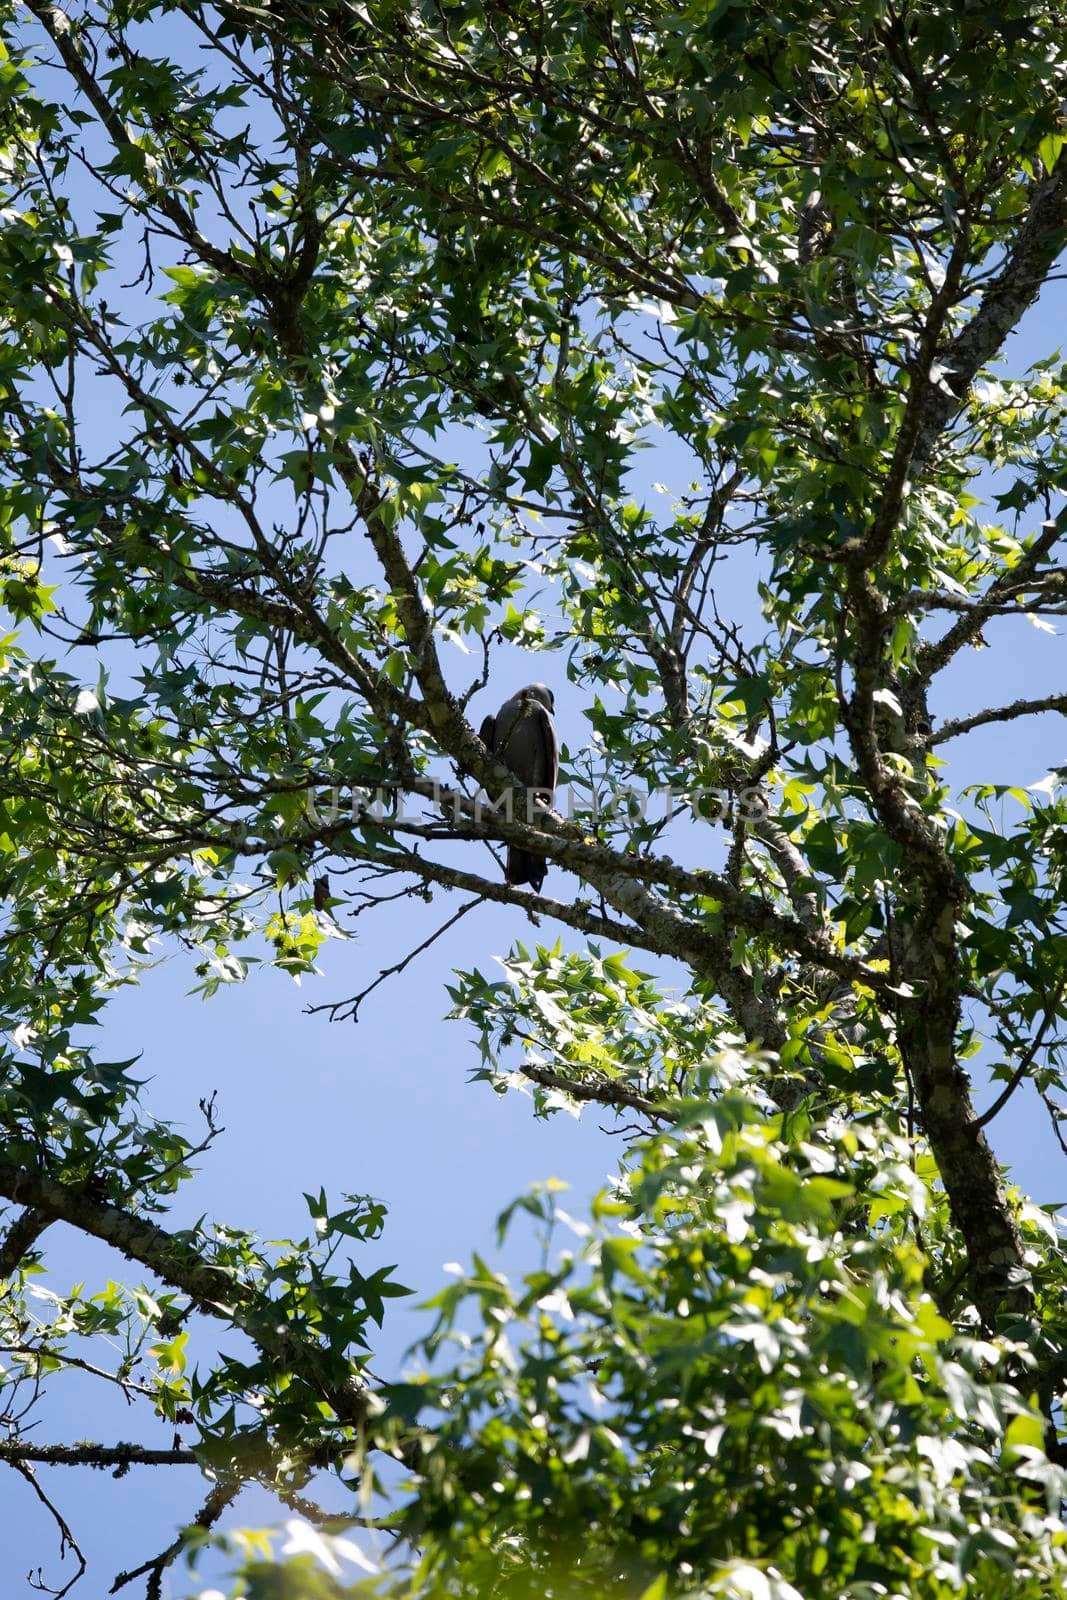 Mississippi kite (Ictinia mississippiensis) looking over its shoulder curiously from a tree branch